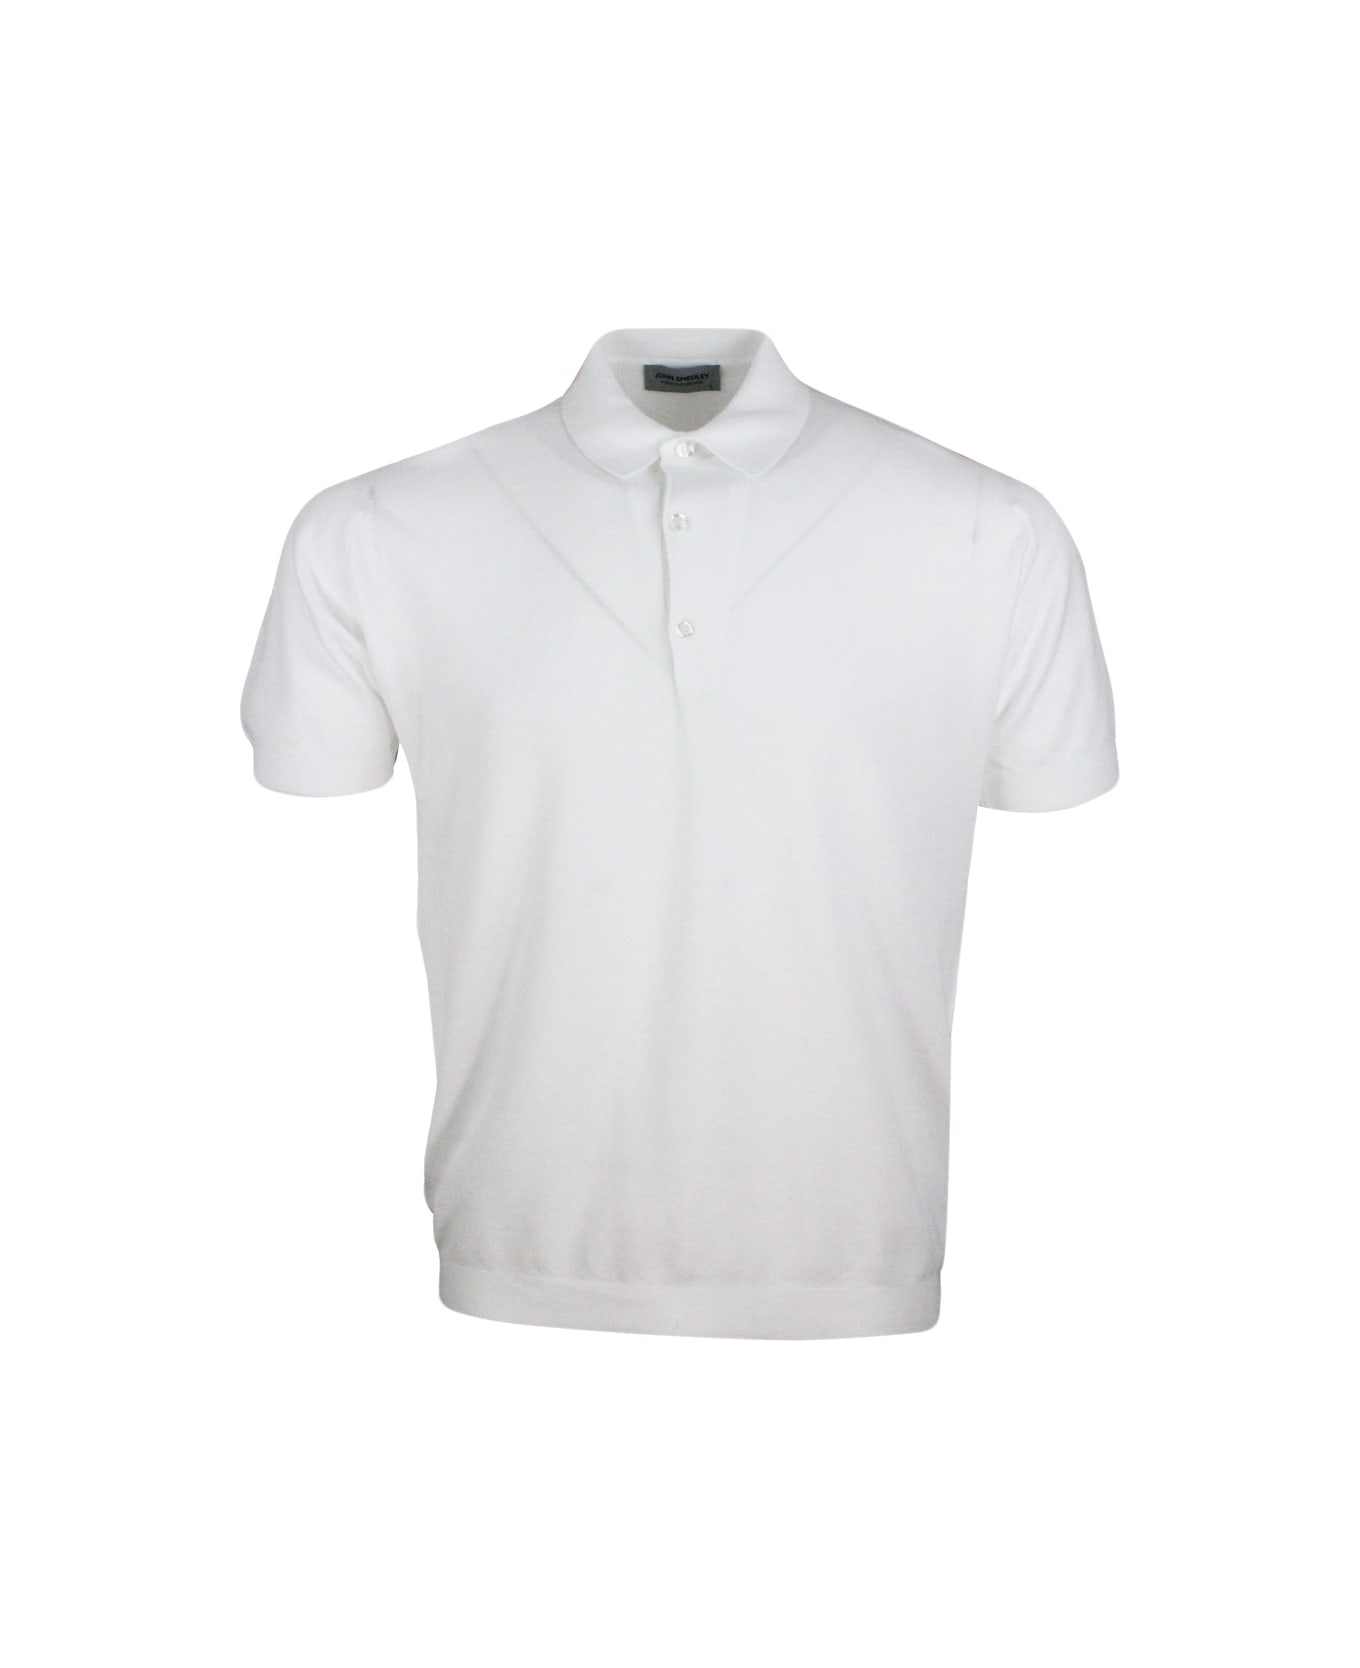 John Smedley Short-sleeved Polo Shirt In Extrafine Piqué Cotton Thread With Three Buttons - White